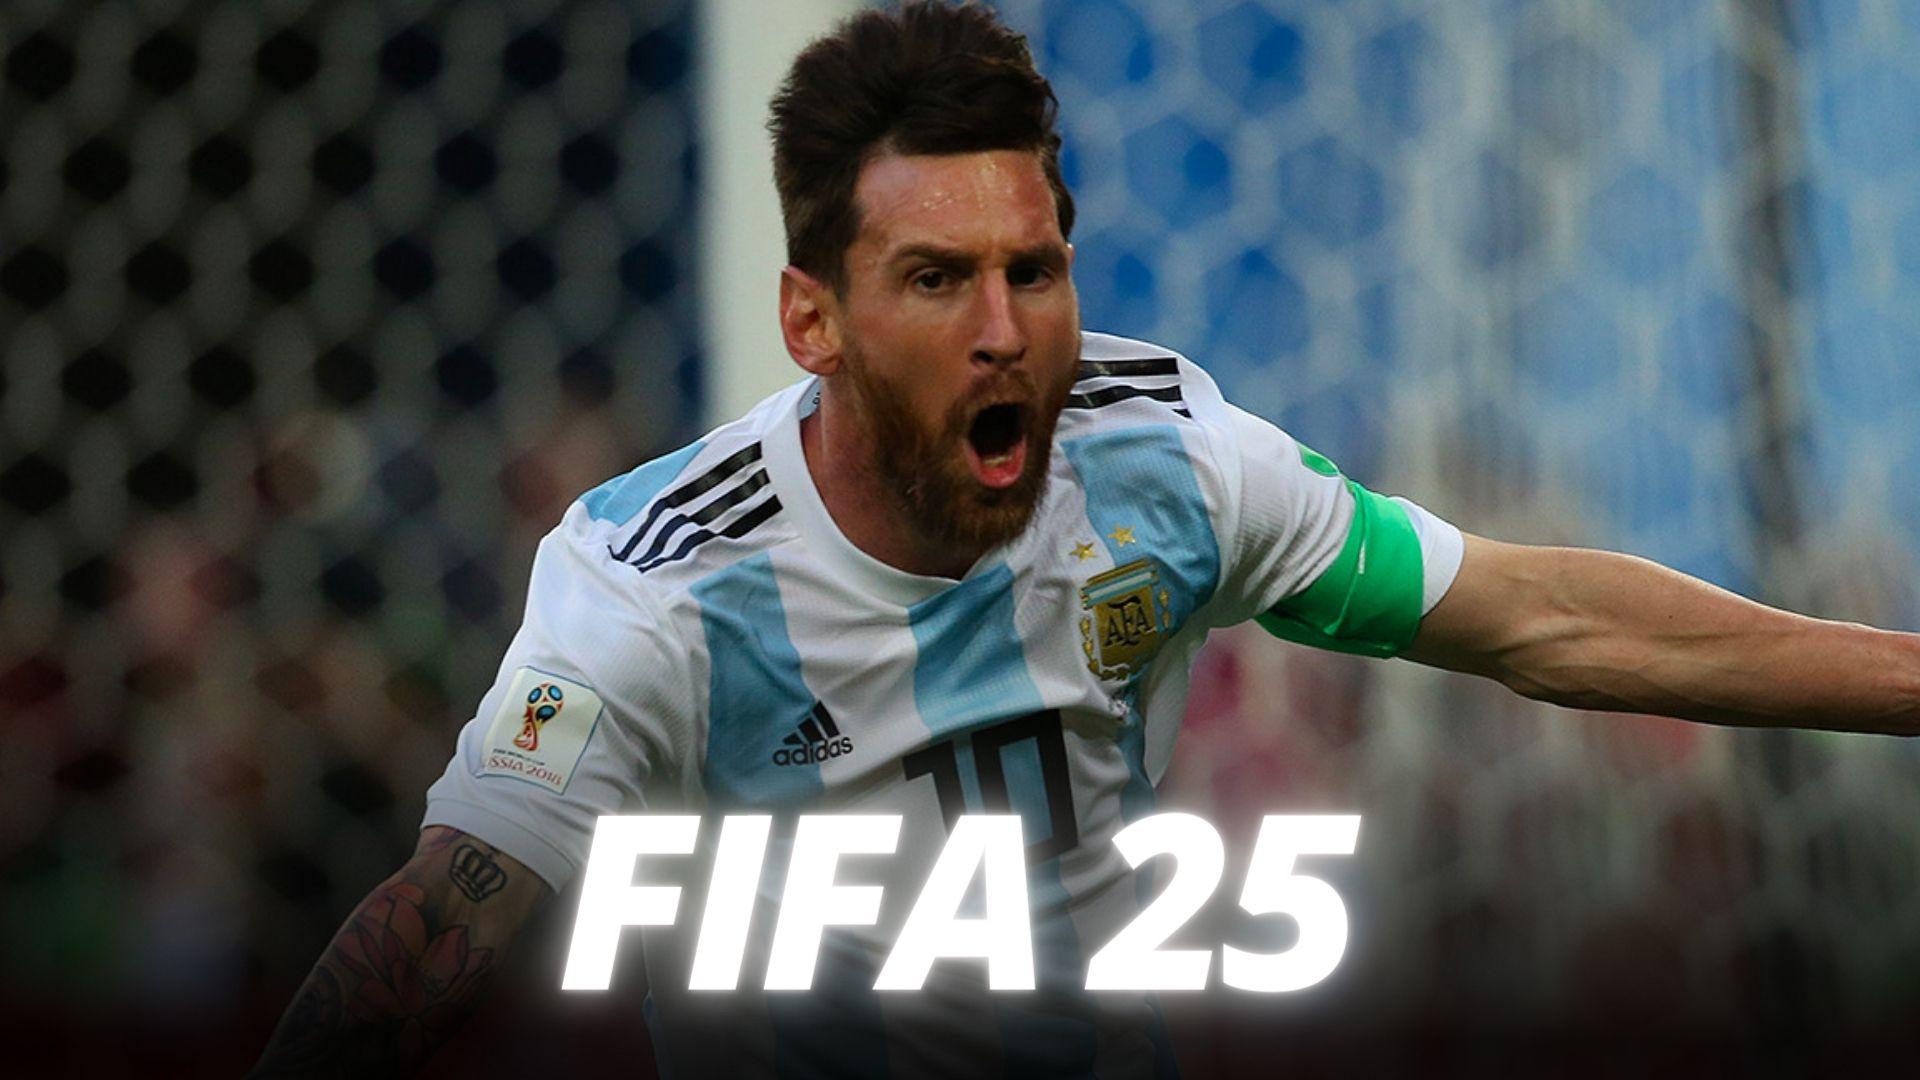 EA Sports FC 24 release date: What split means for the next FIFA game